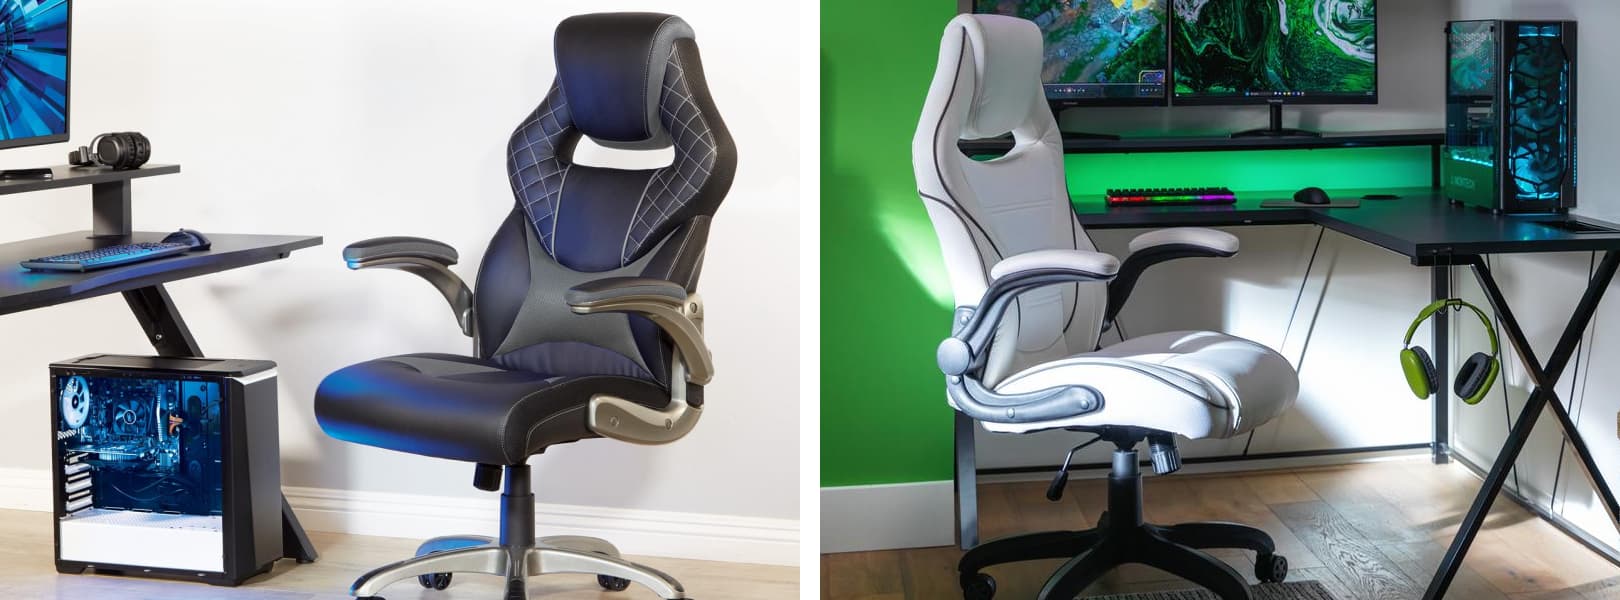 How to Design the Ultimate Gaming Setup